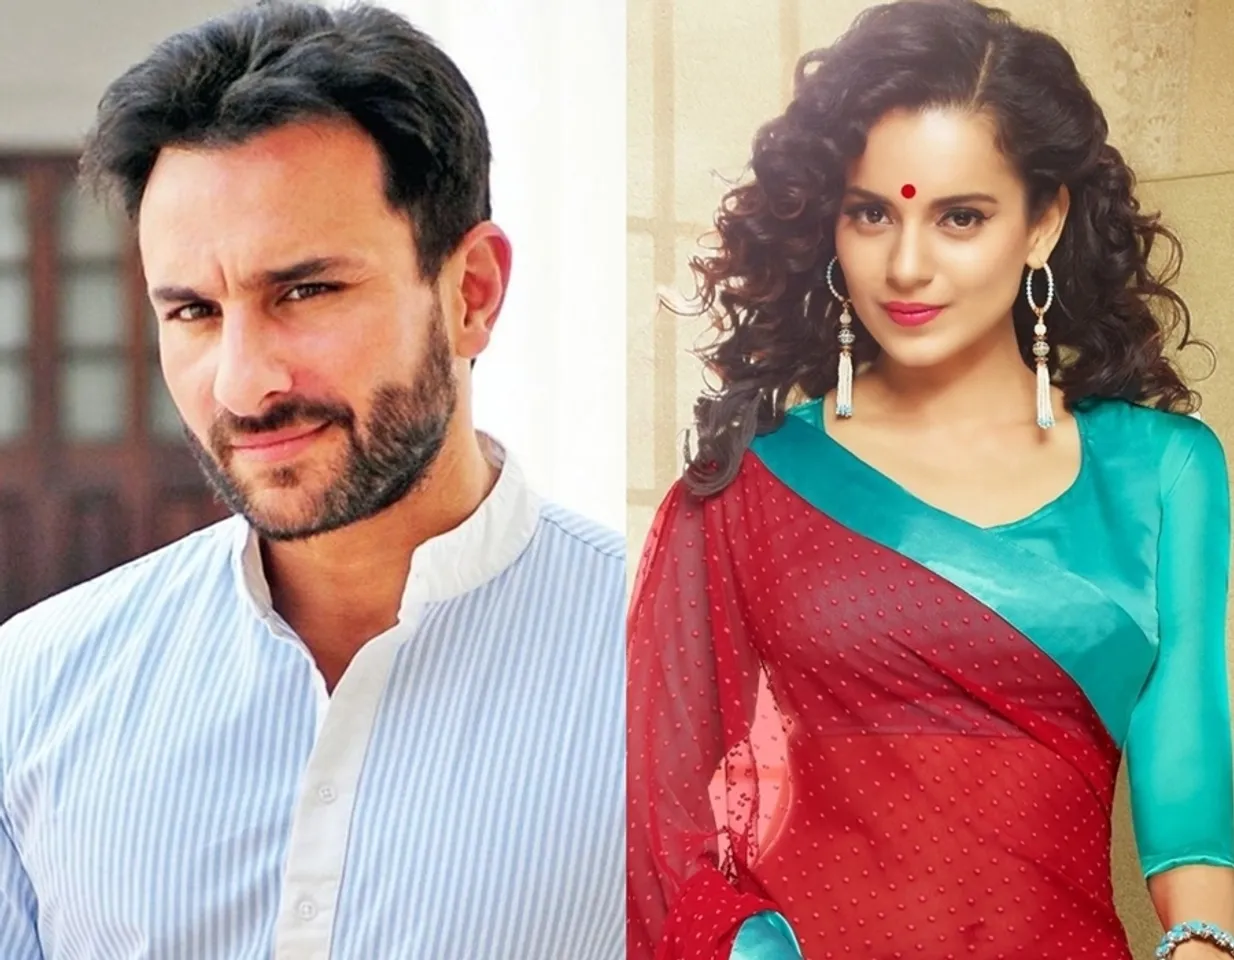 SAIF ALI KHAN WRITES OPEN LETTER TO APOLOGISE FOR NEPOTISM REMARKS